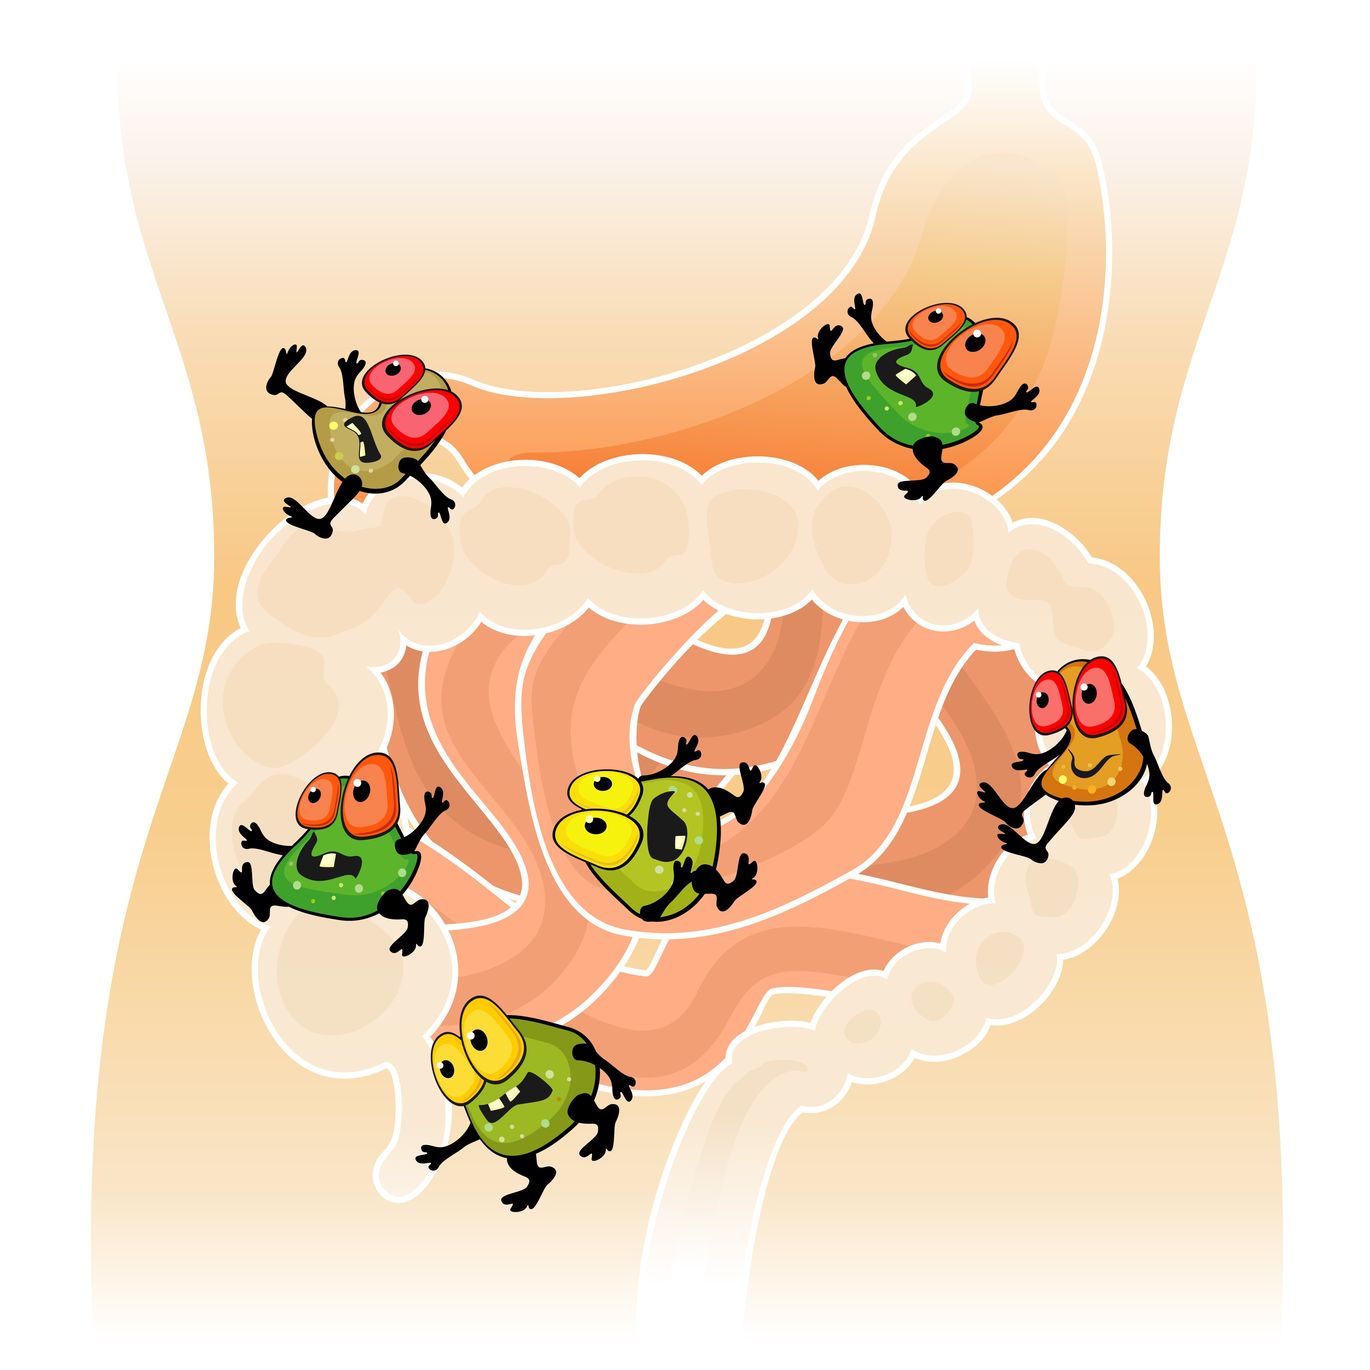 The Second Brain: Gut Flora and Why We Need It